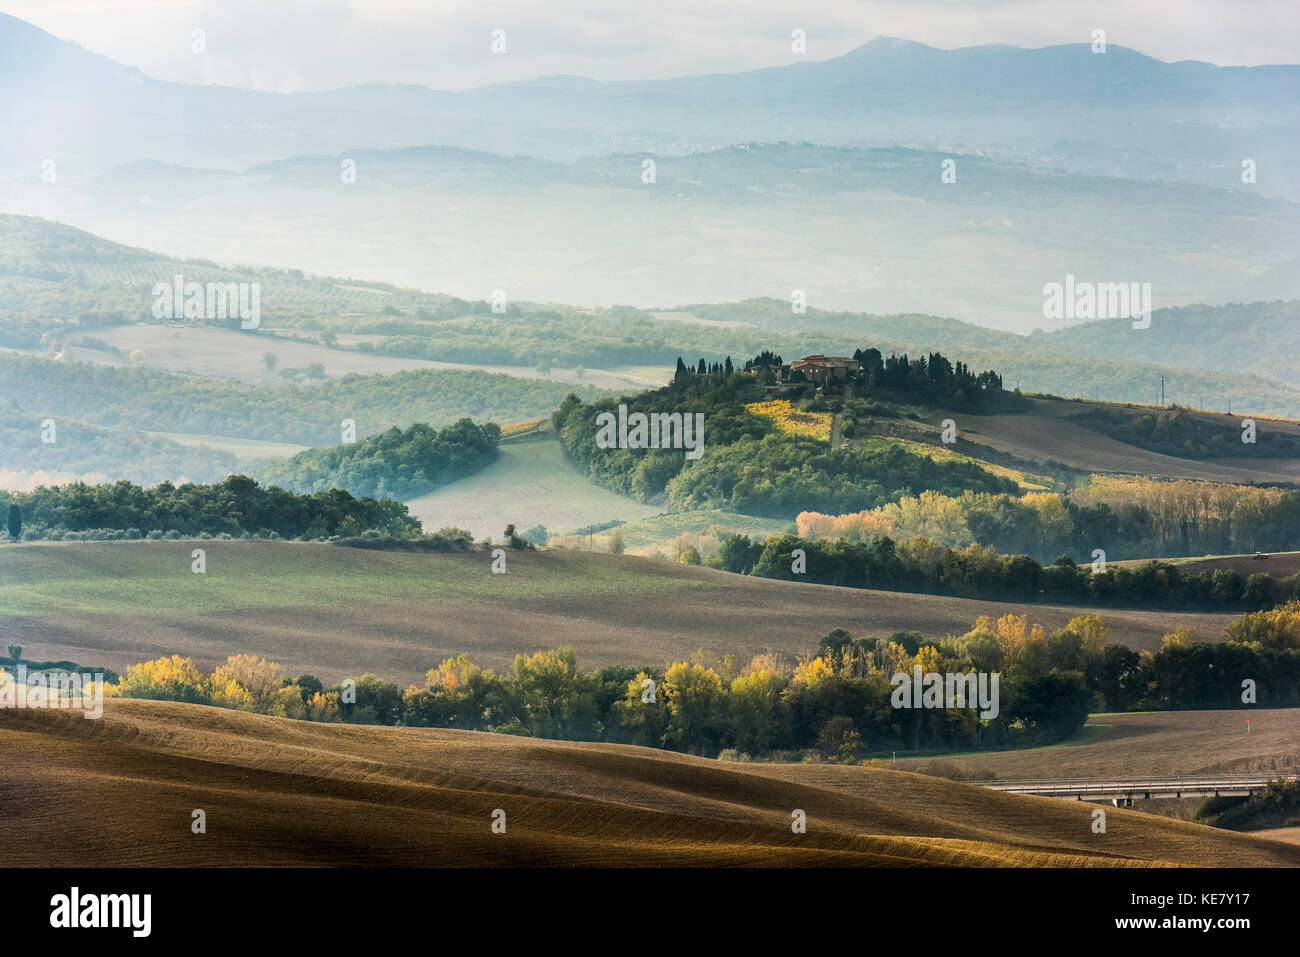 Layers Of Green And Gray Tuscany Hills Disappearing In The Mist; San Quirico D'orcia, Tuscany, Italy Stock Photo